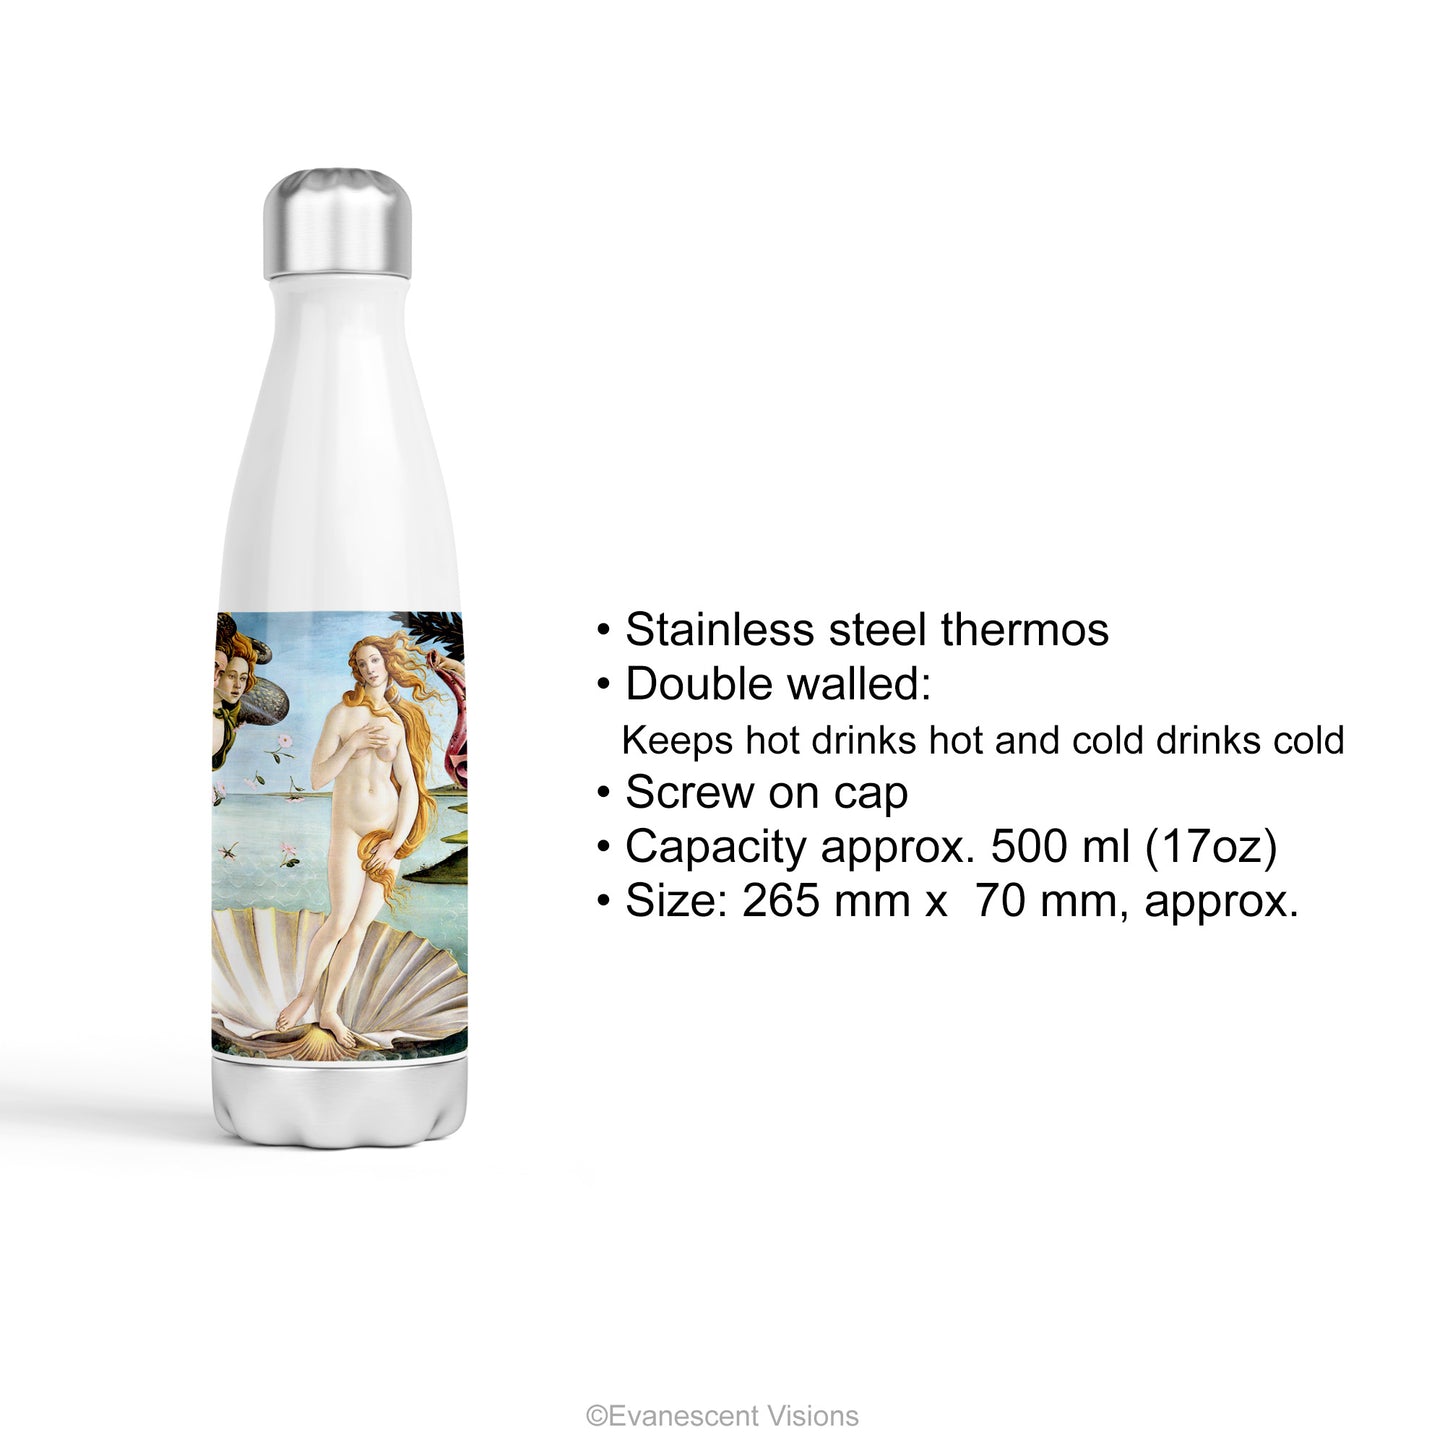 Product details for the Birth of Venus Stainless Steel Water Bottle, Thermos